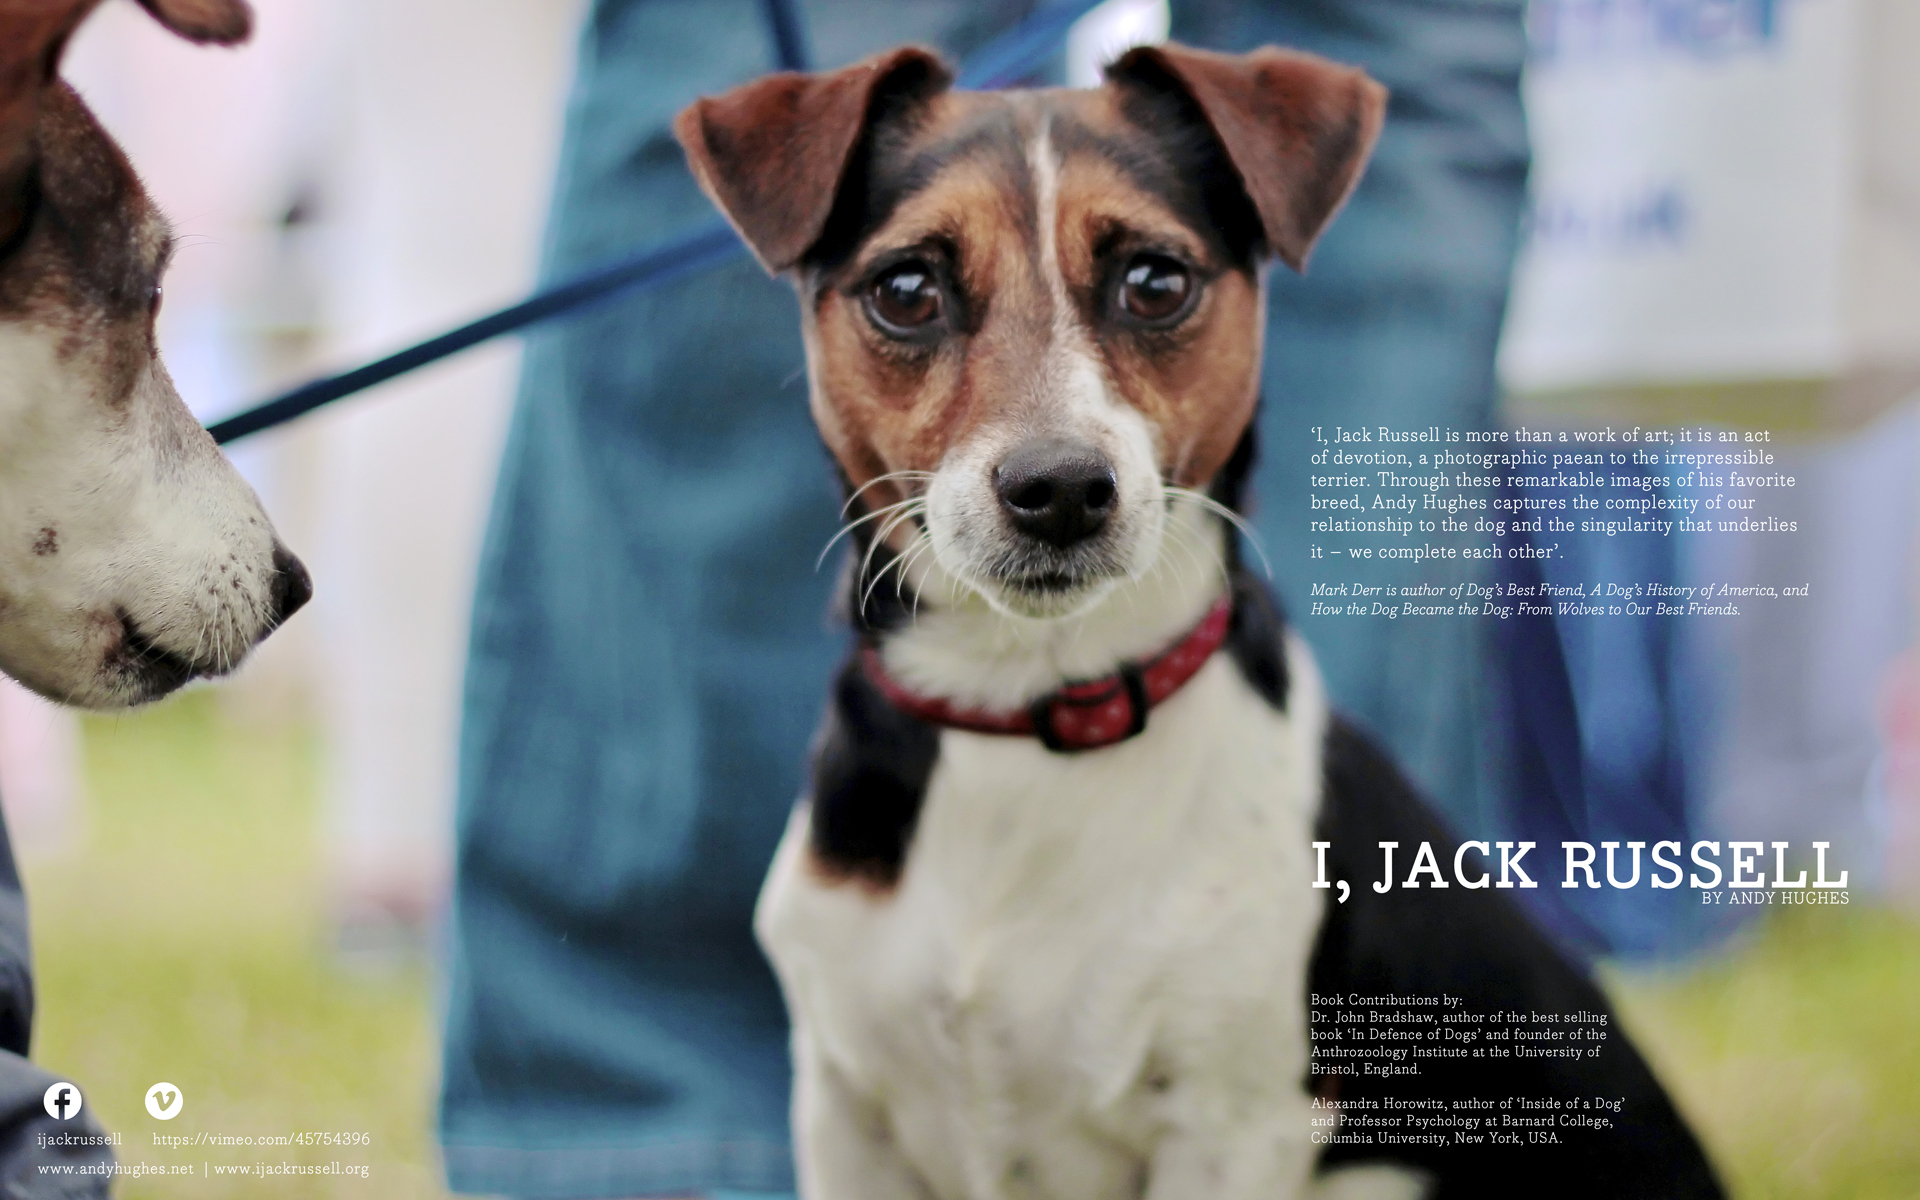 I, Jack Russell: A Photographer And A Dog's Eye View - HD Wallpaper 